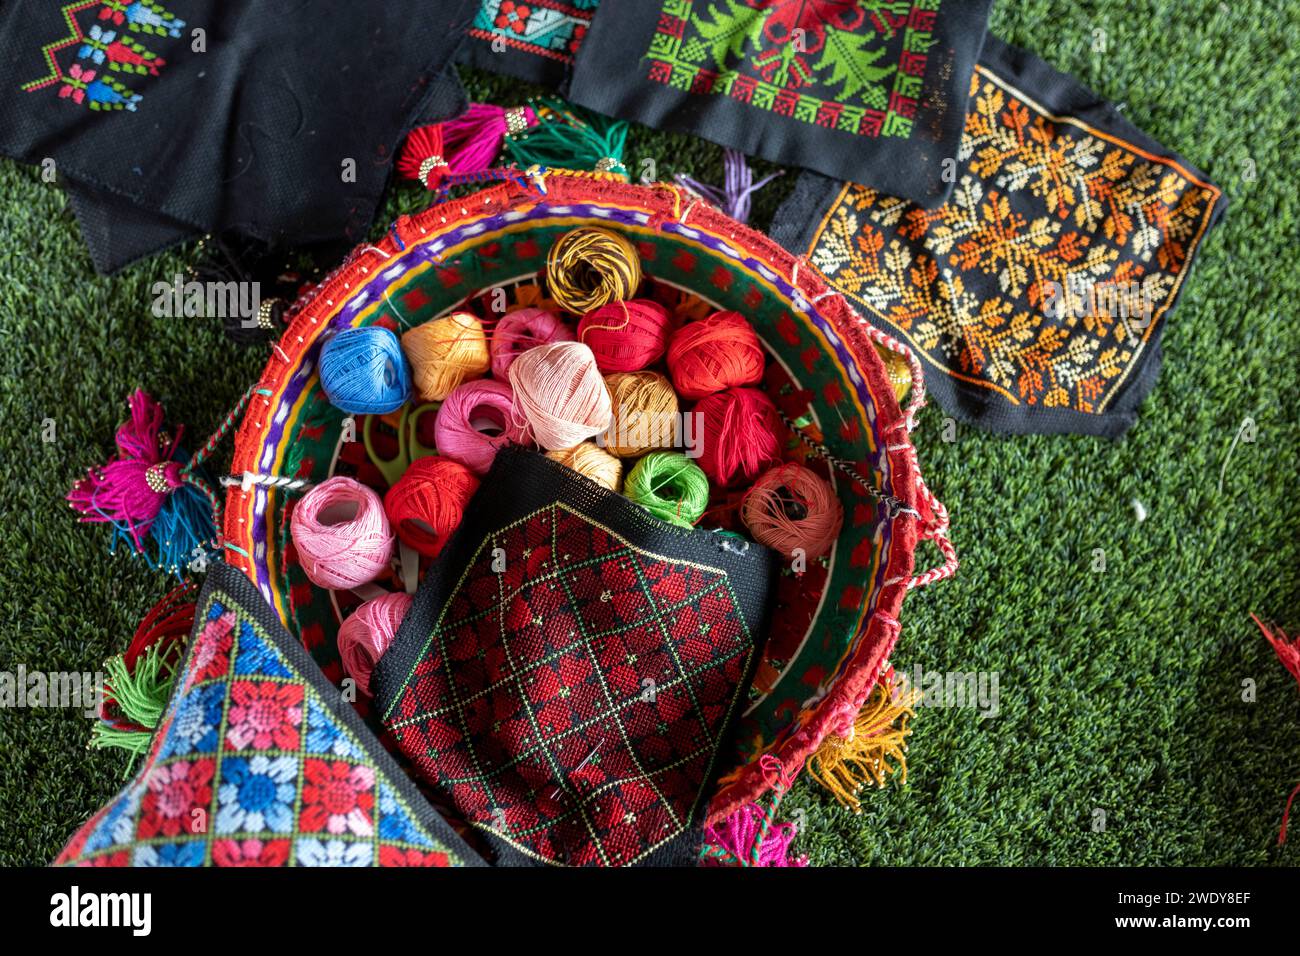 Embroidery and multi-colored balls of thread in a wicker basket on the table. Stock Photo